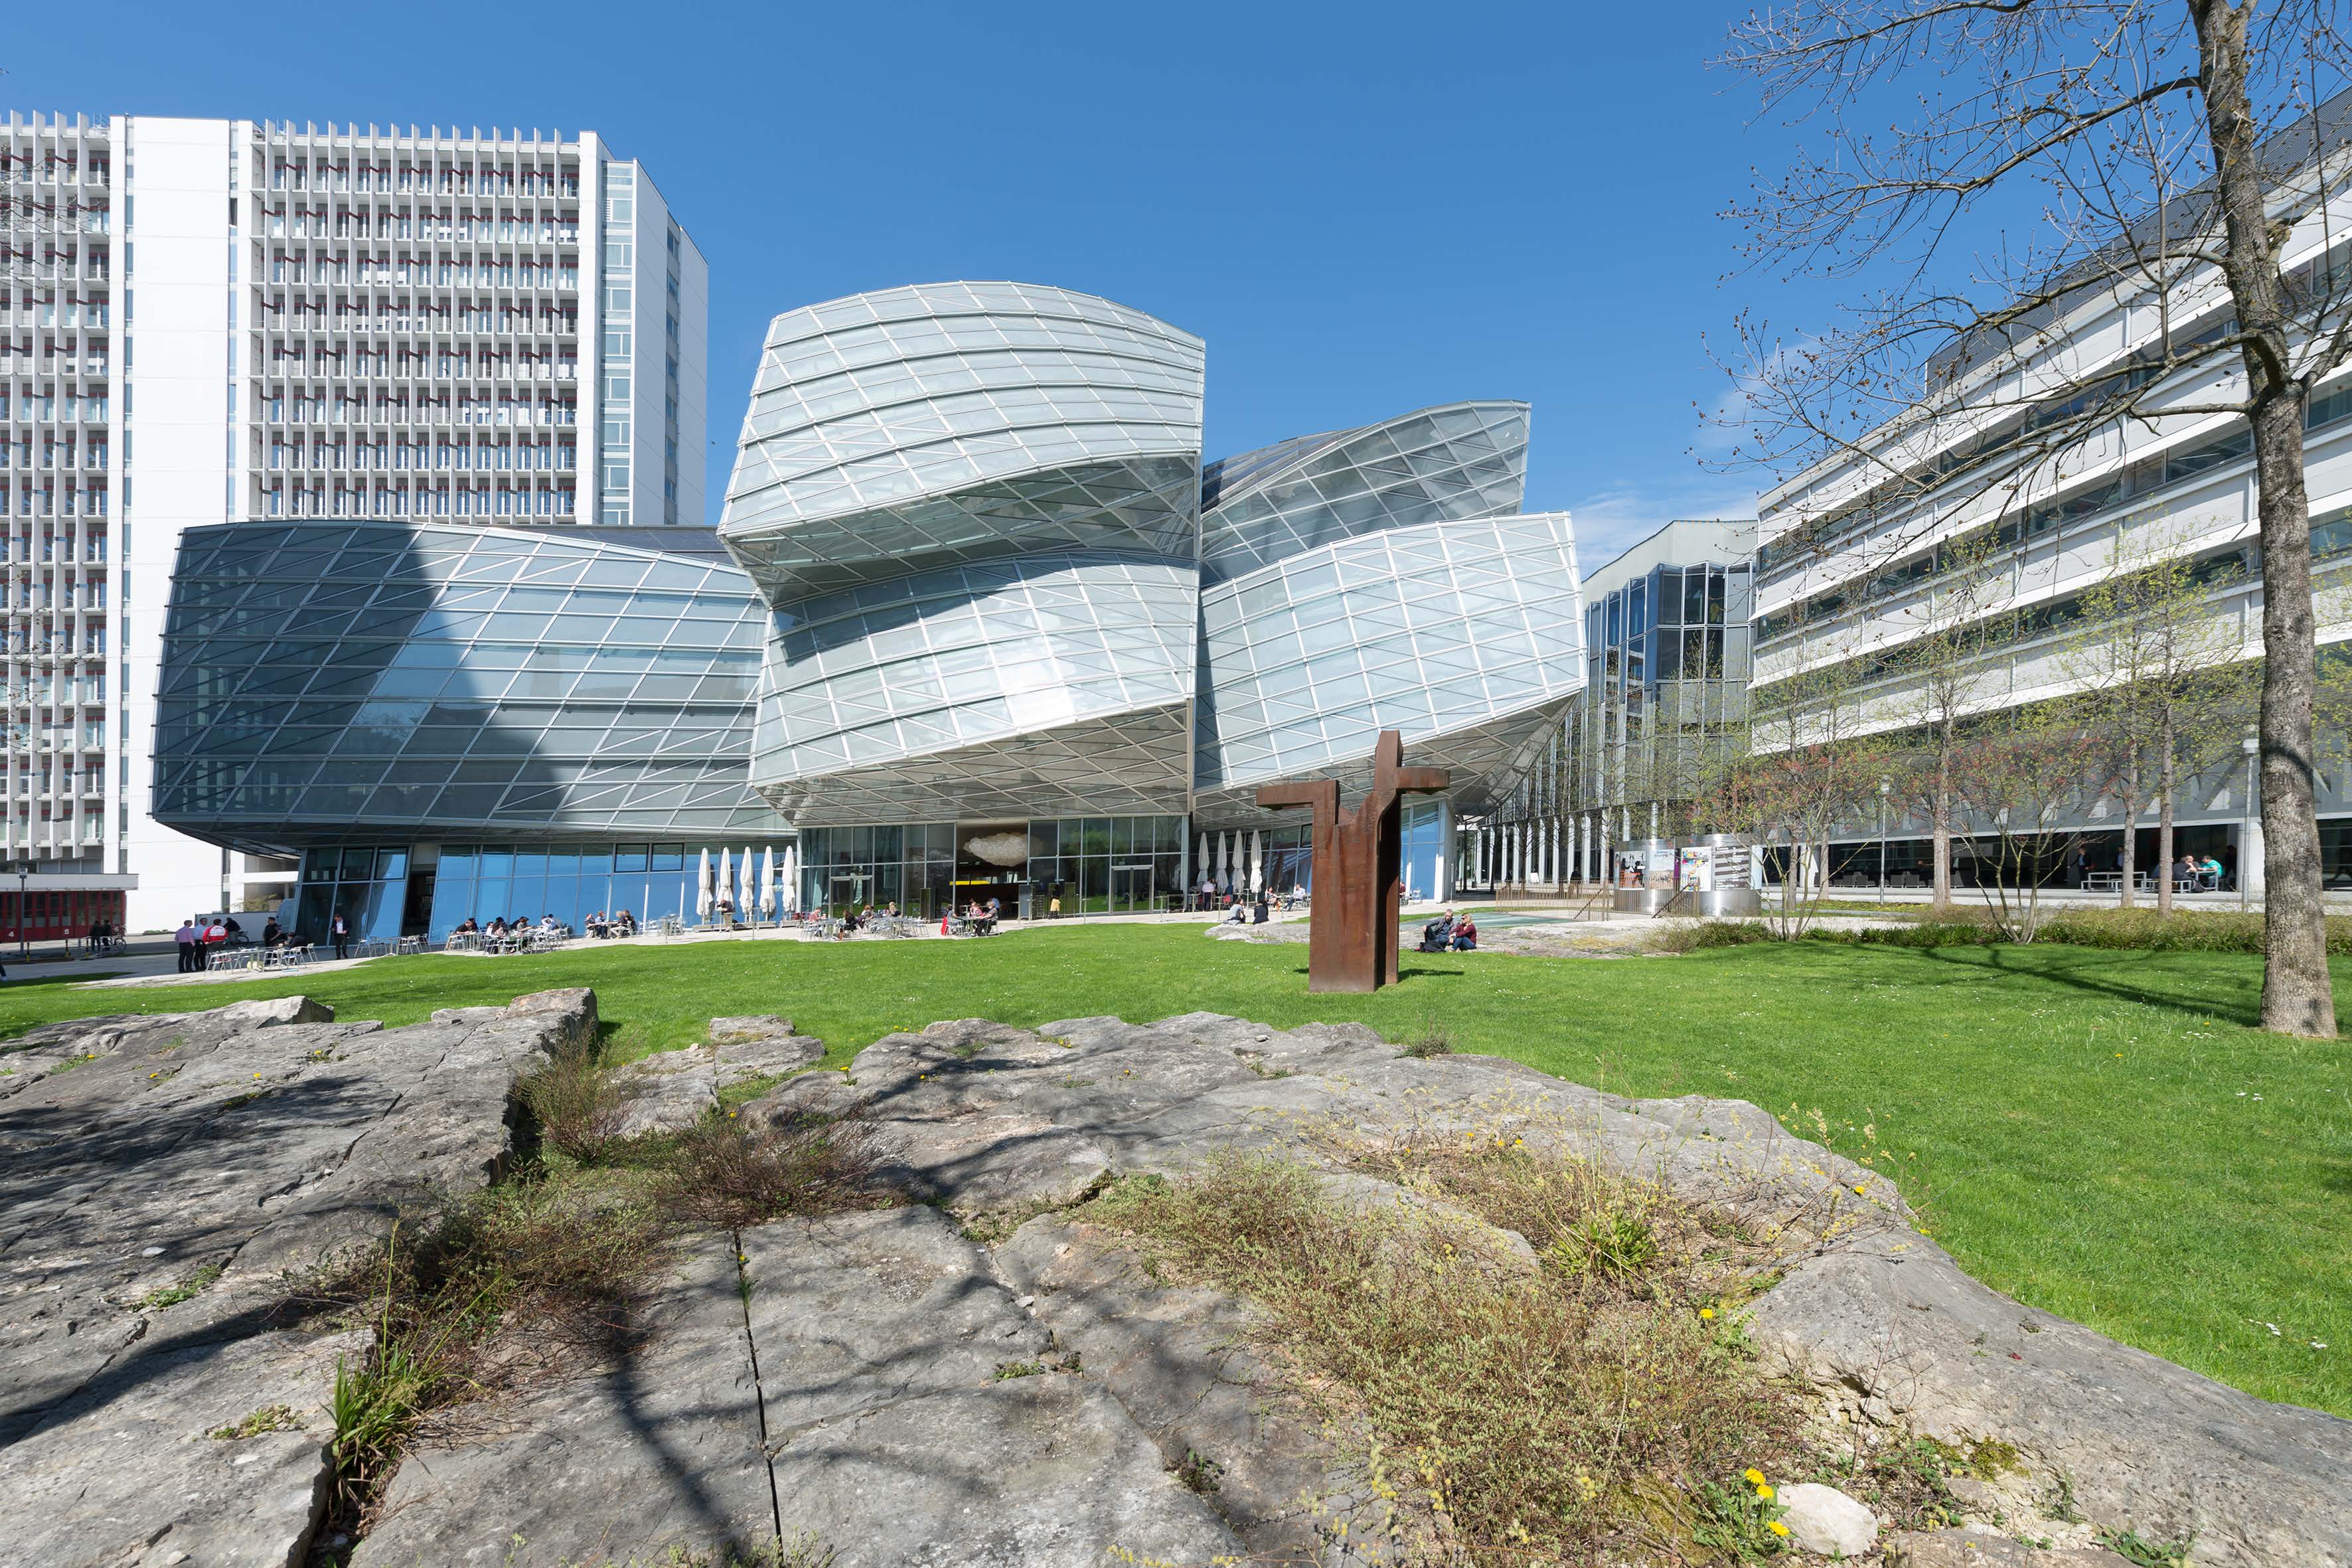 Frontal view of Gehry building